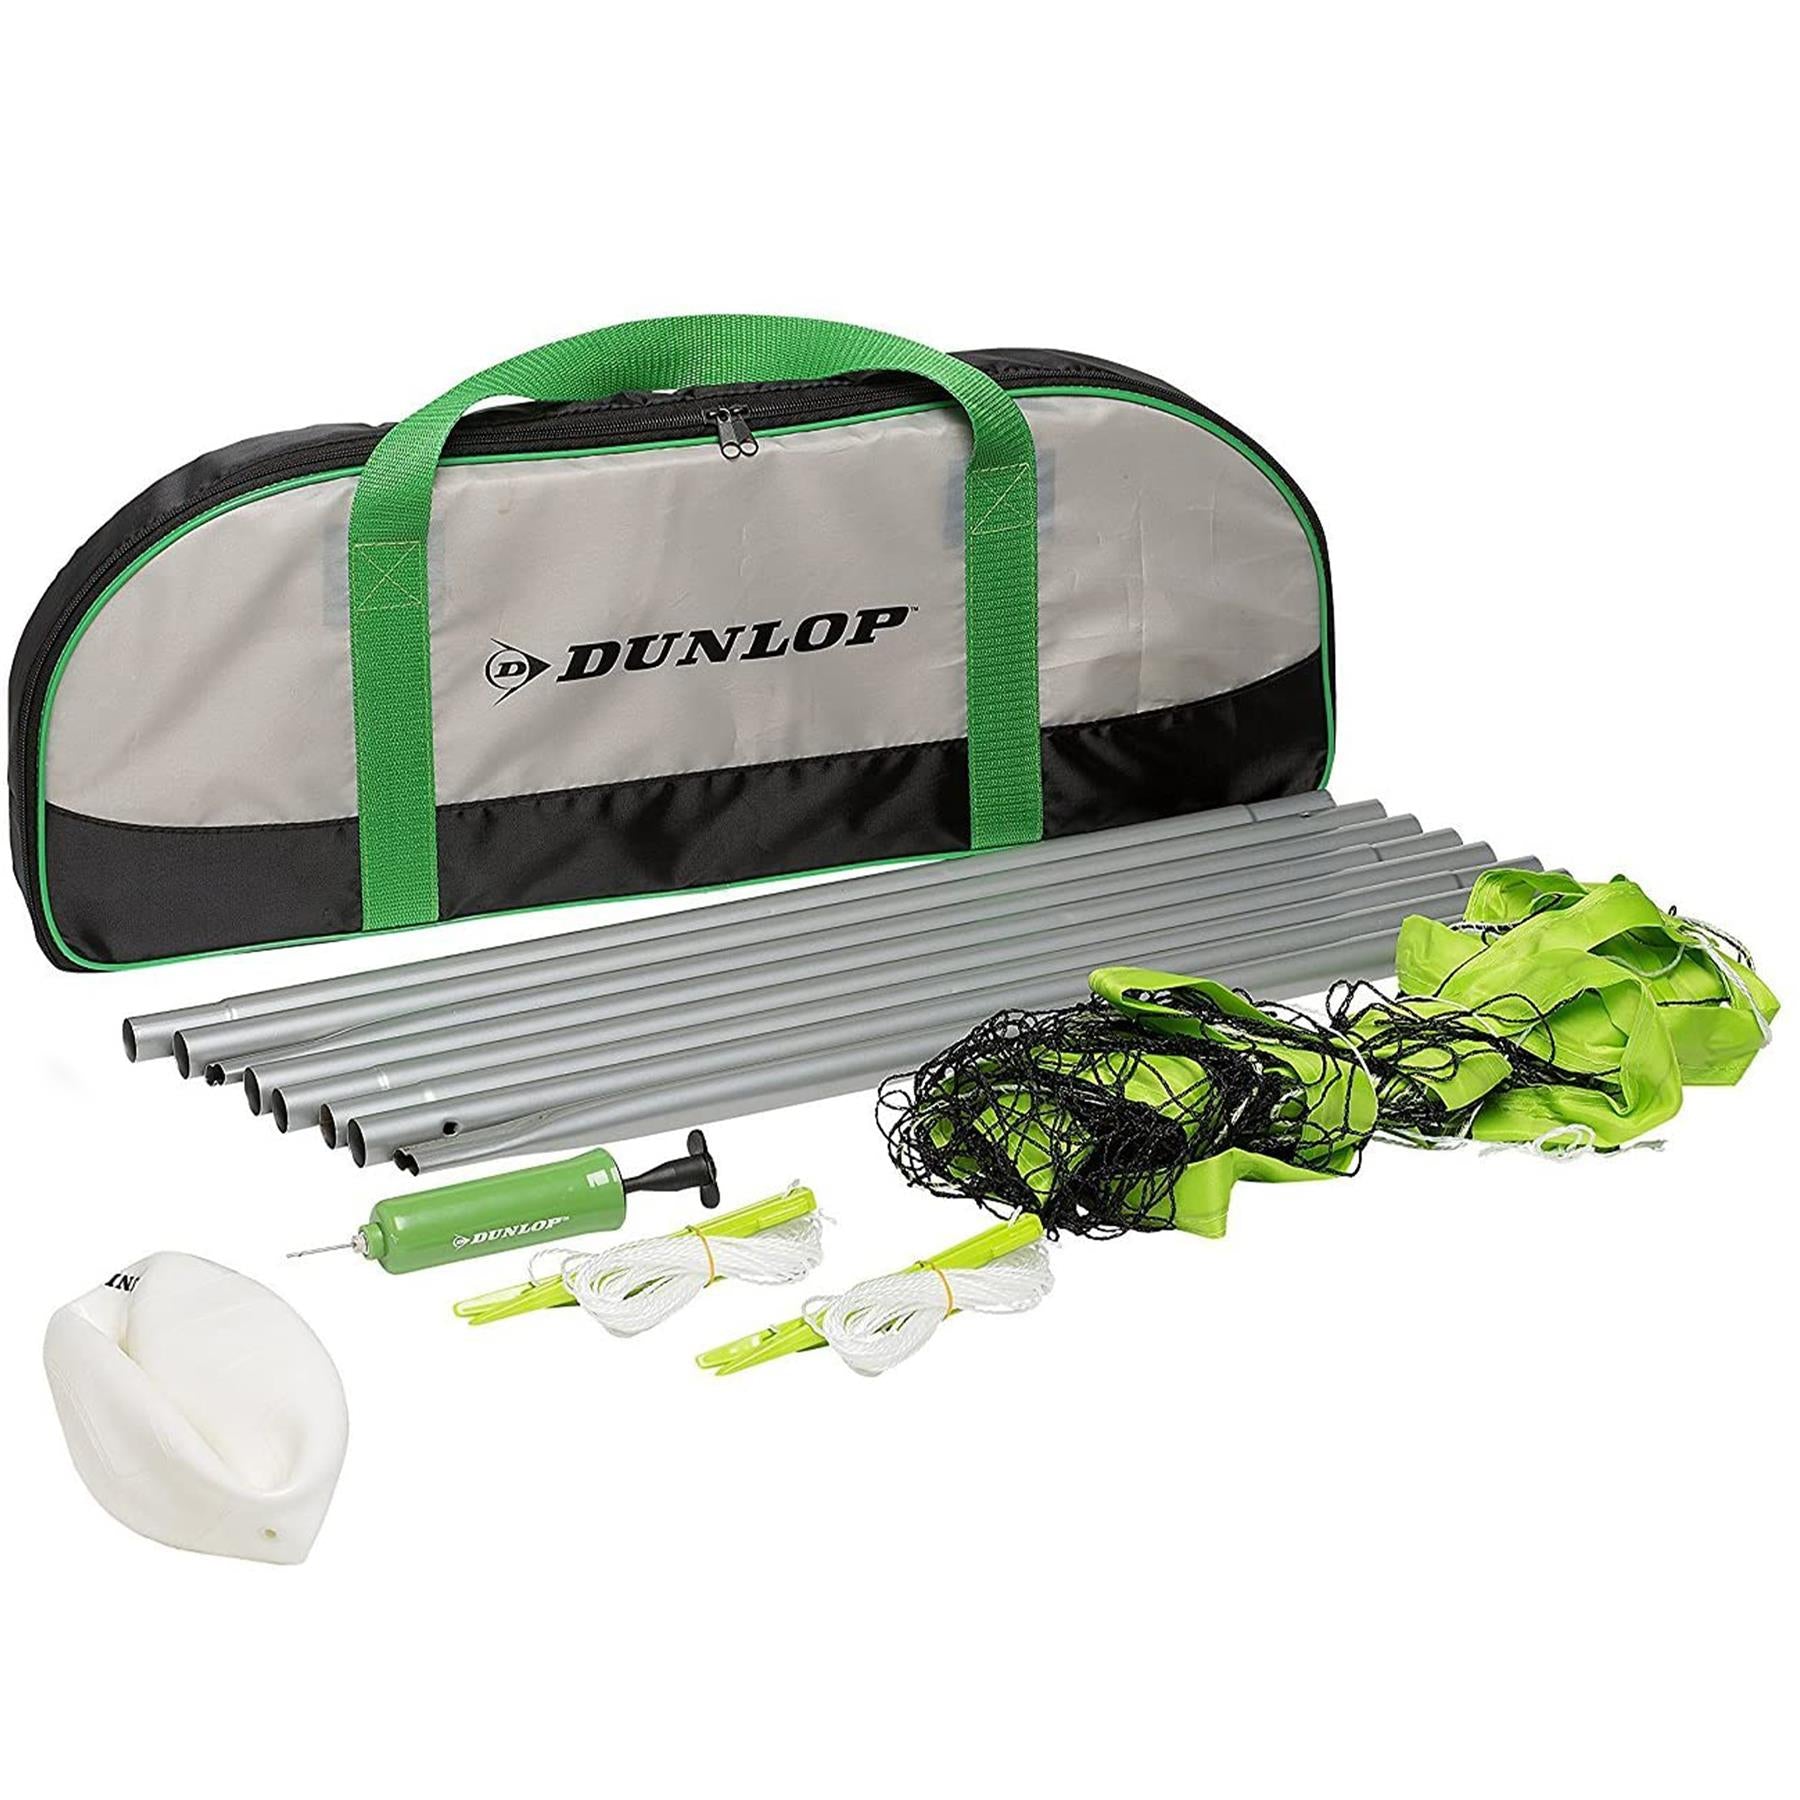 Dunlop Volleyball Set with Pump, Ball and Carry Bag by The Magic Toy Shop - The Magic Toy Shop